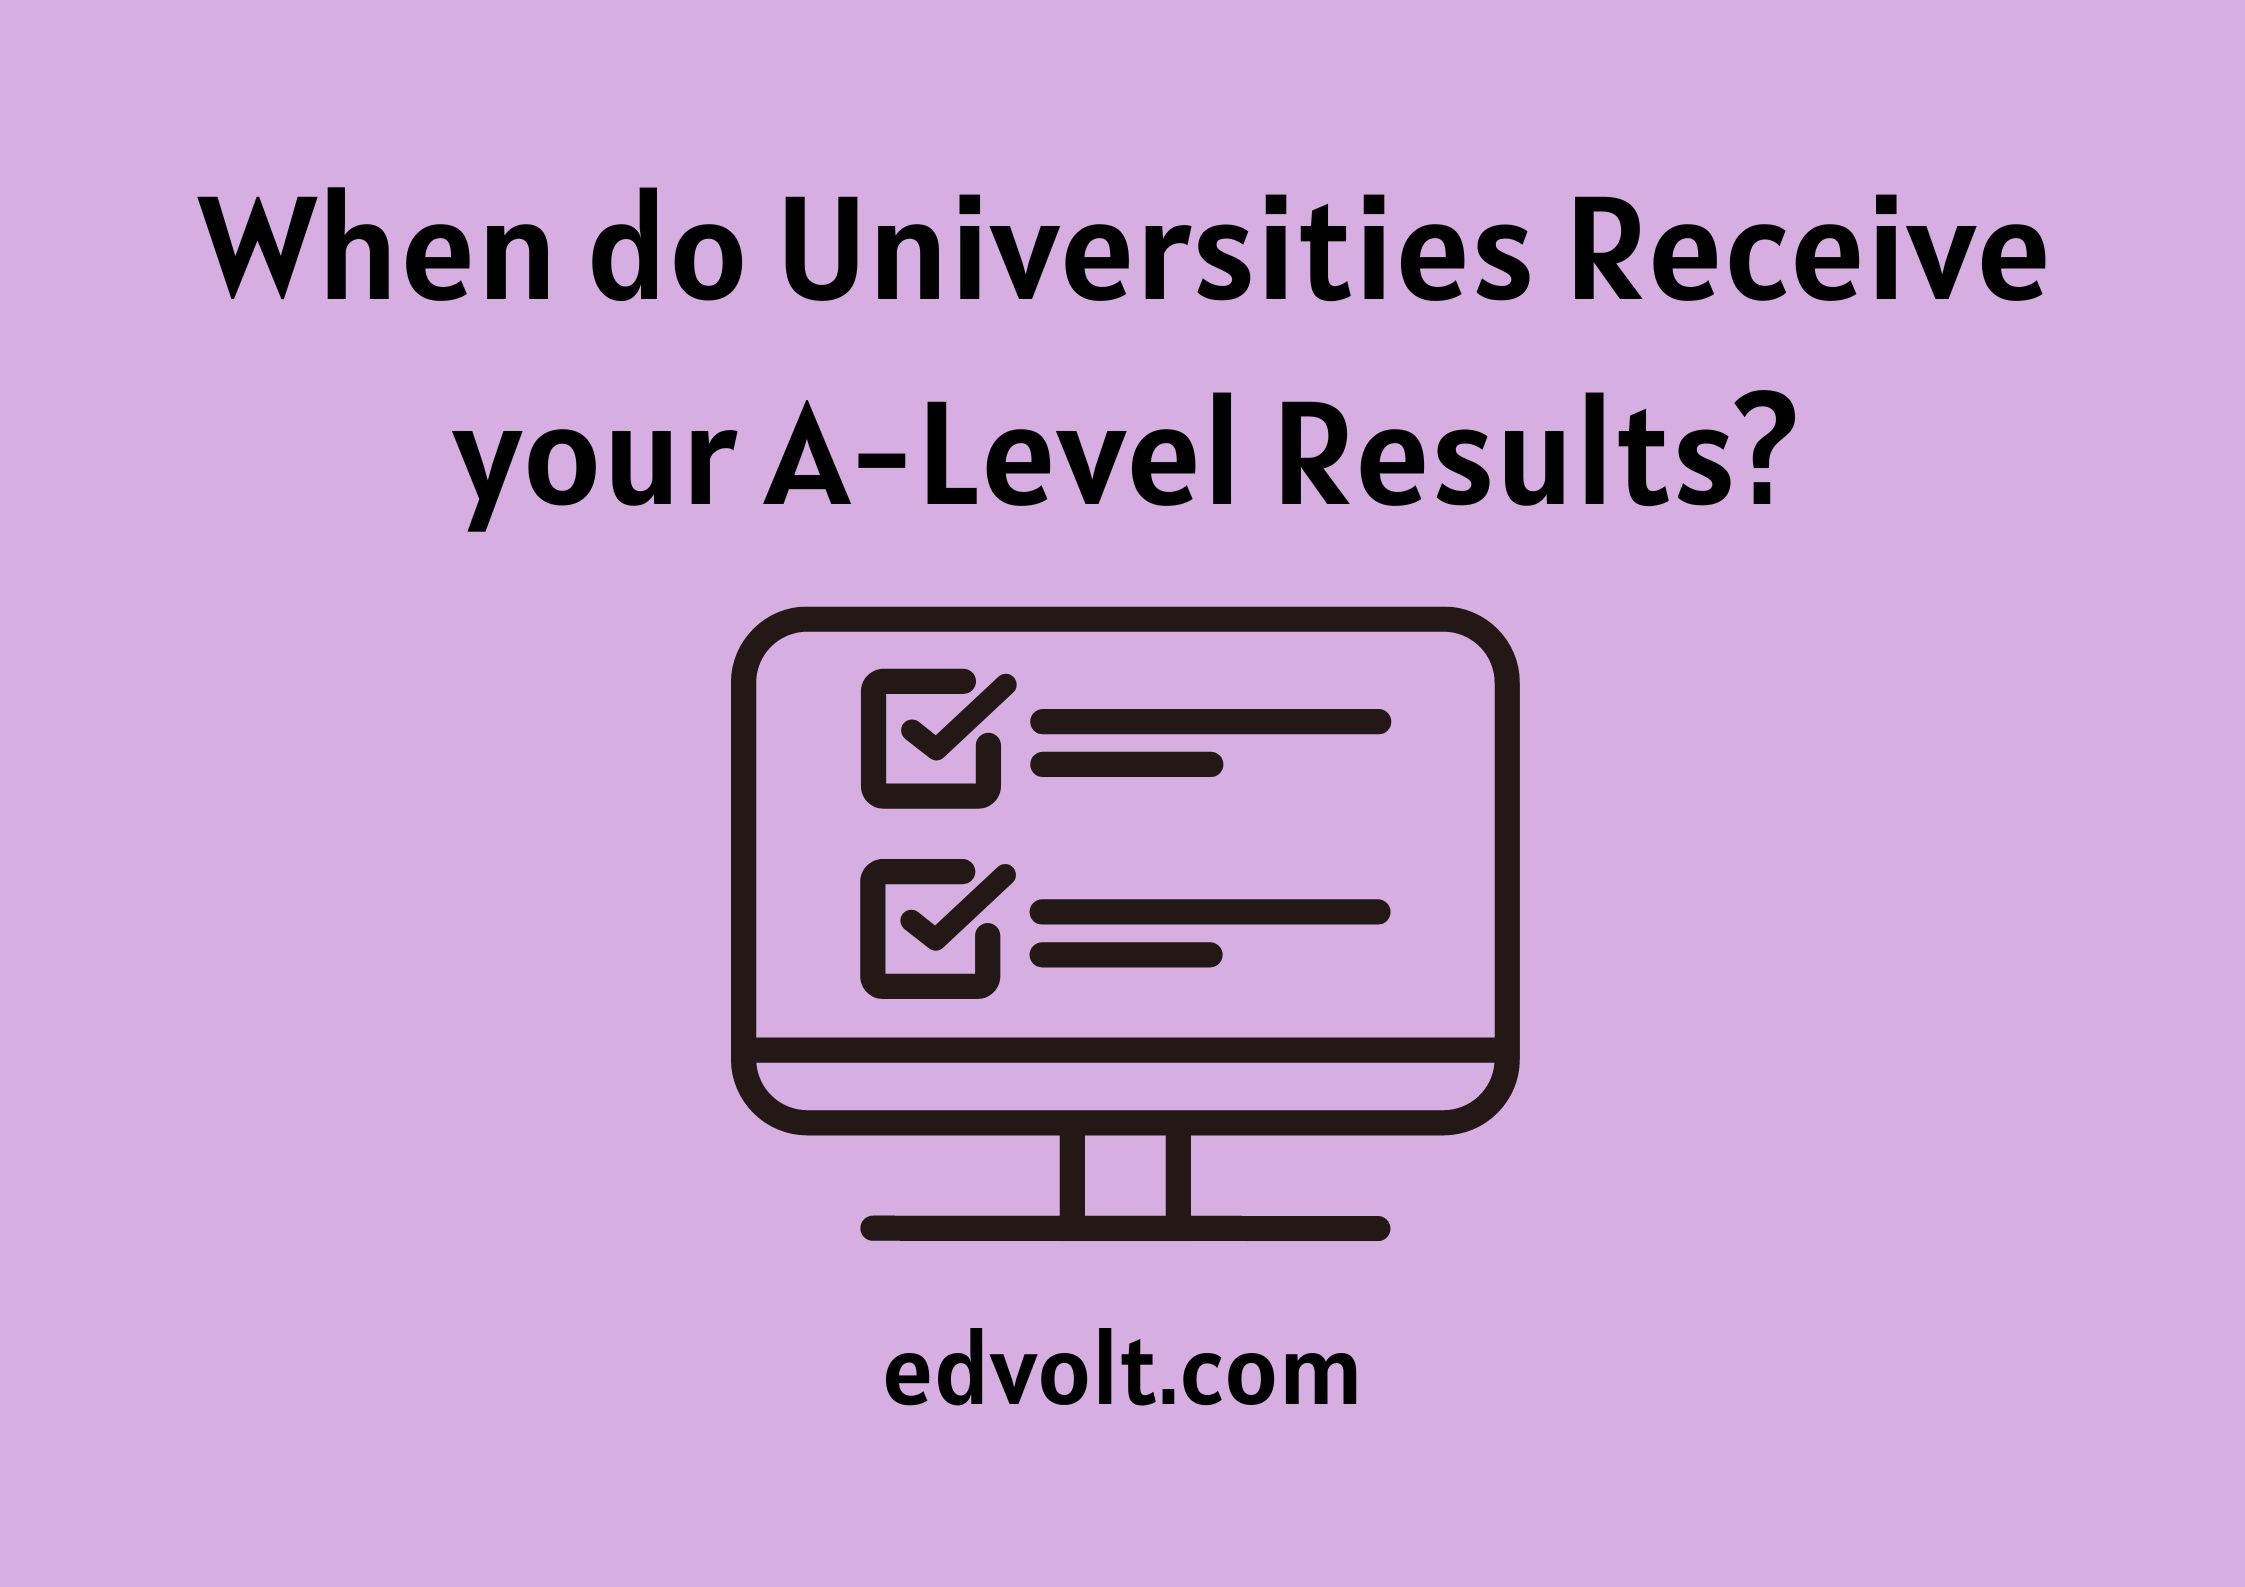 When do Universities Receive your A-Level Results?